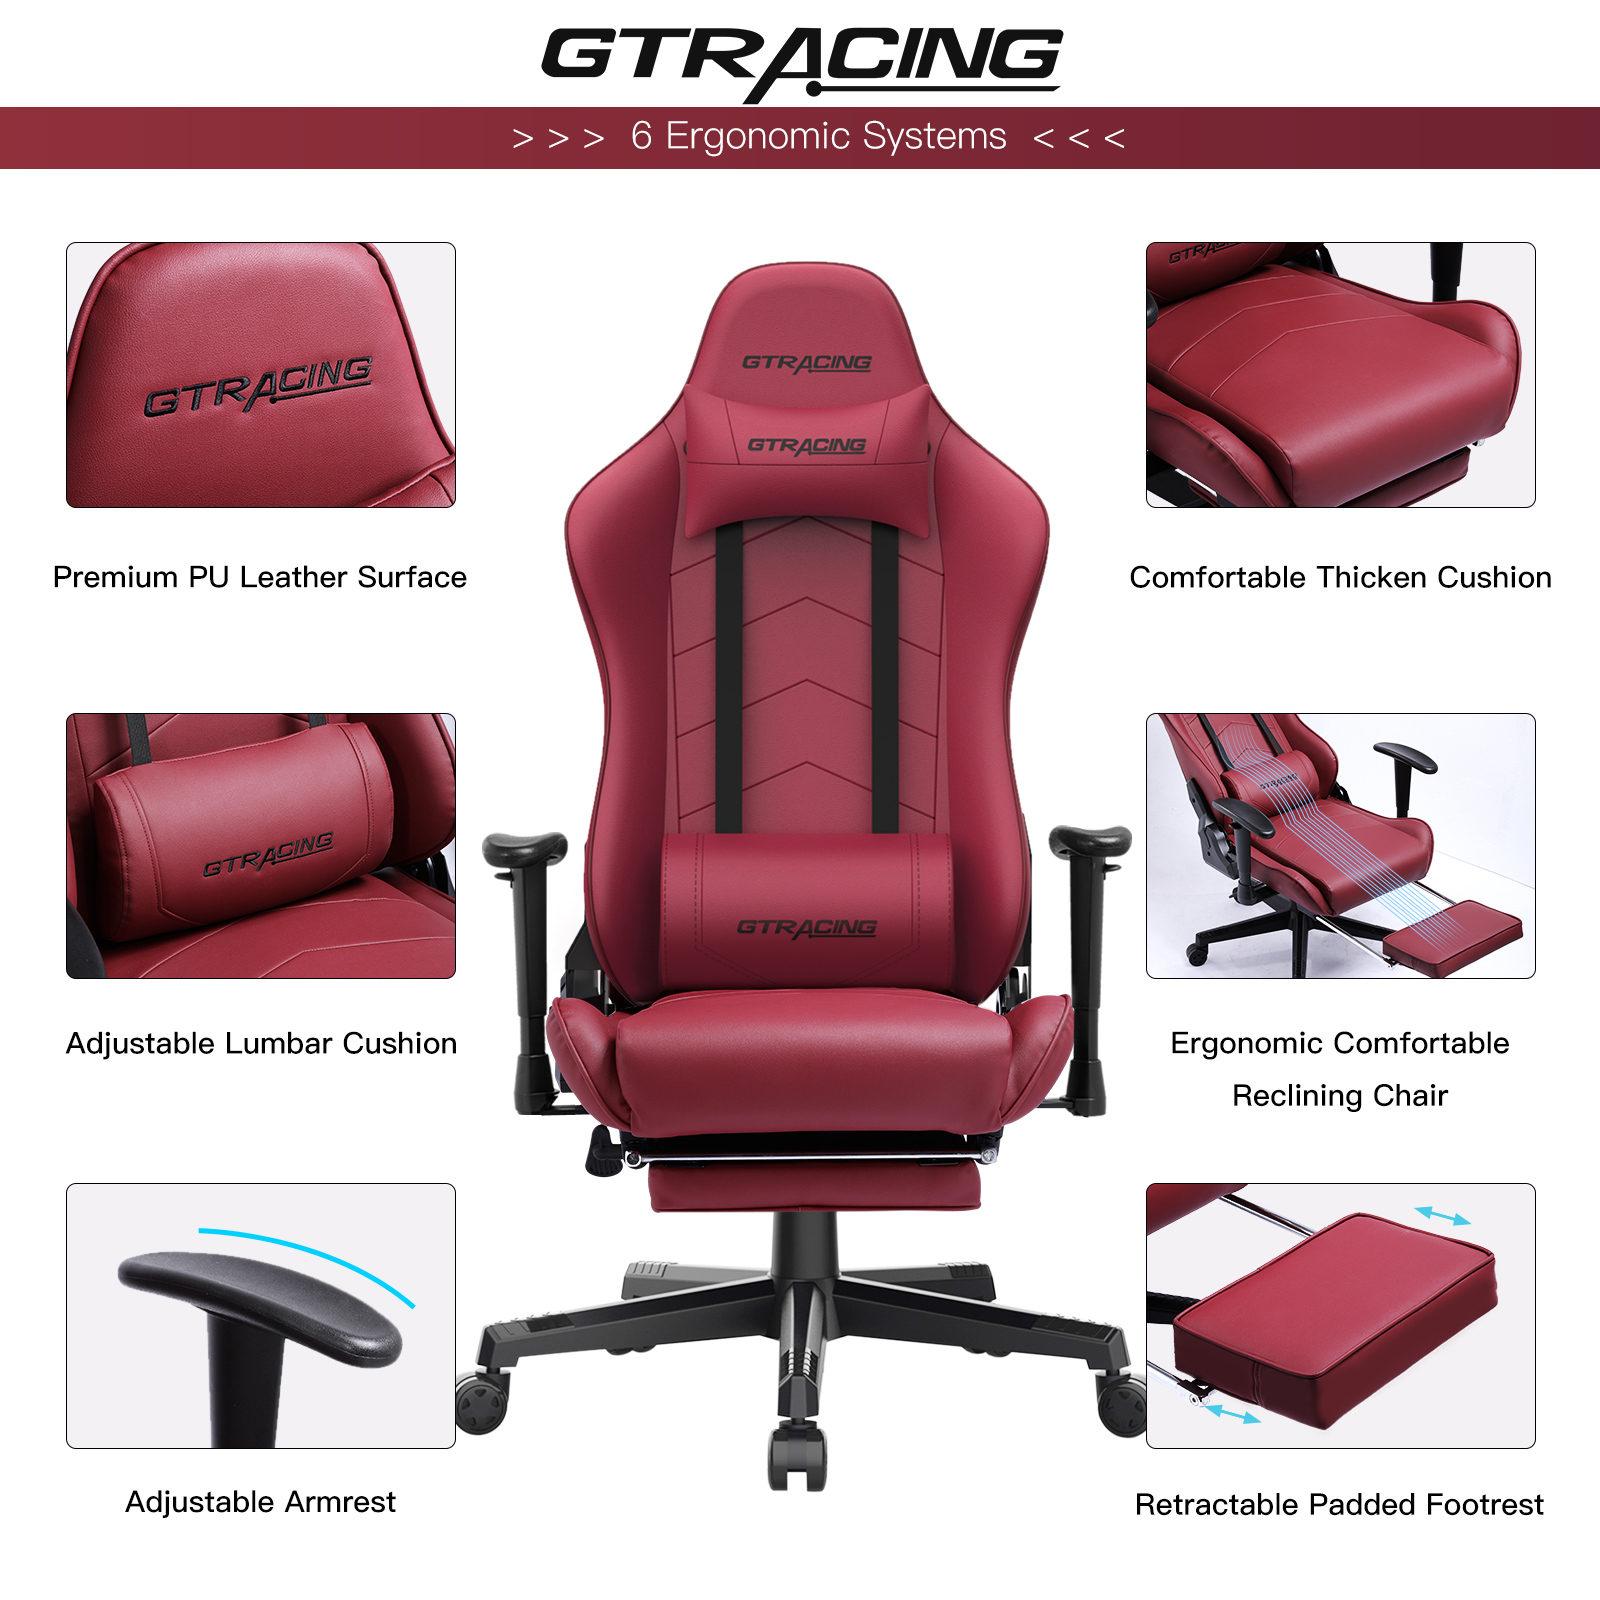 GTRACING Gaming Chair with Footrest Ergonomic Reclining Leather Chair, Dark Red - image 2 of 6